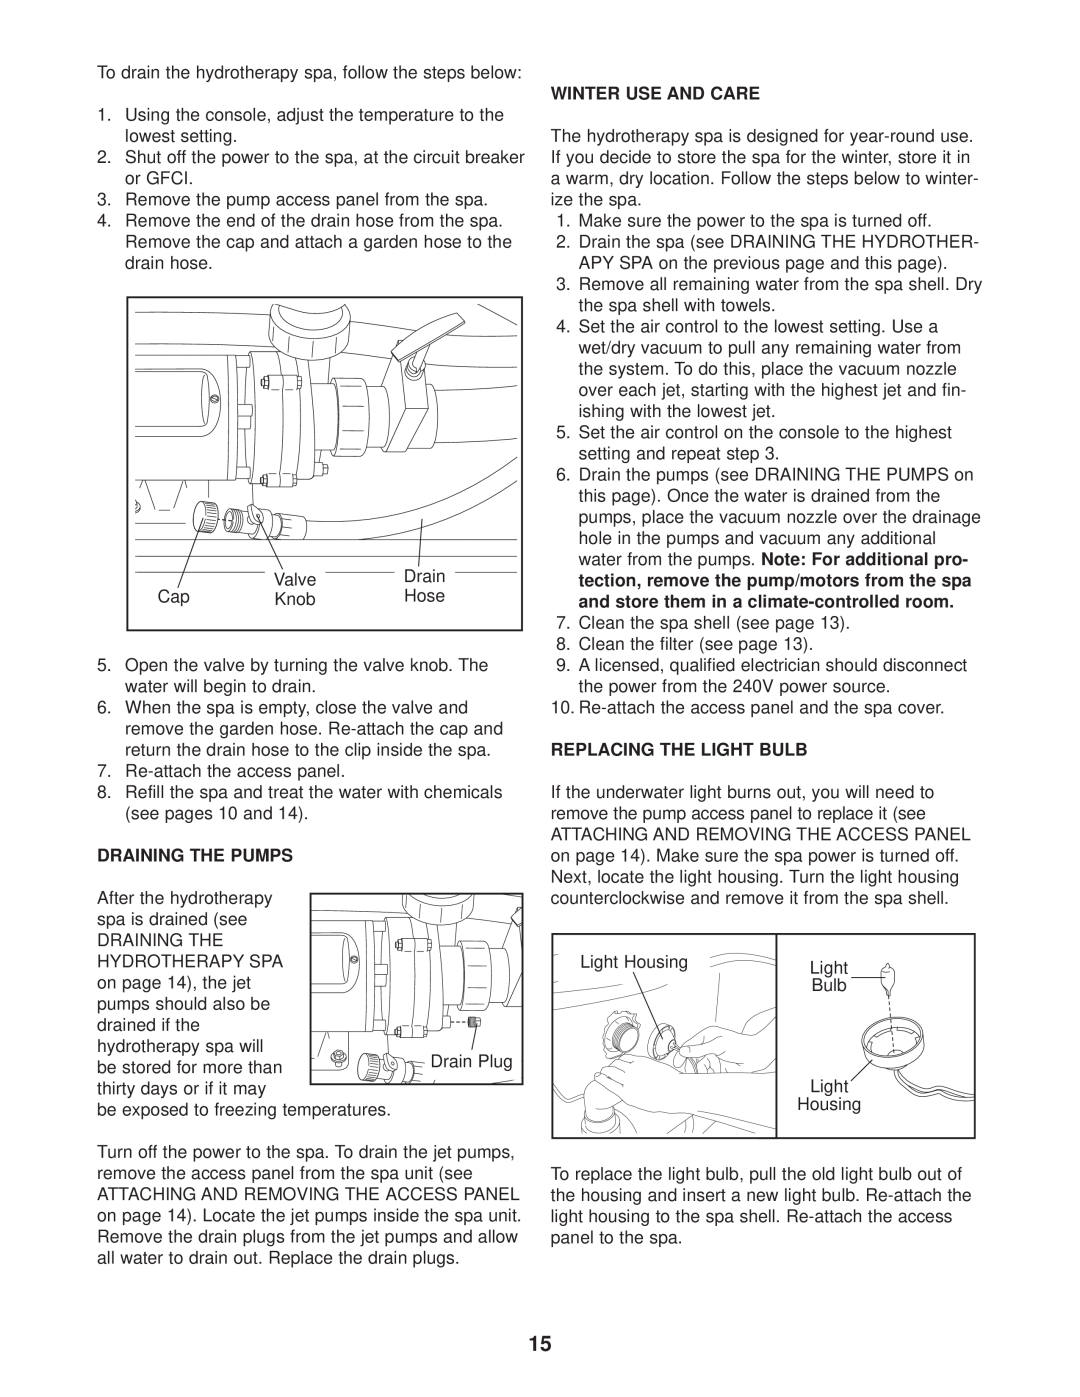 Image IMHS63100 user manual Draining The Pumps, Winter Use And Care, Replacing The Light Bulb 